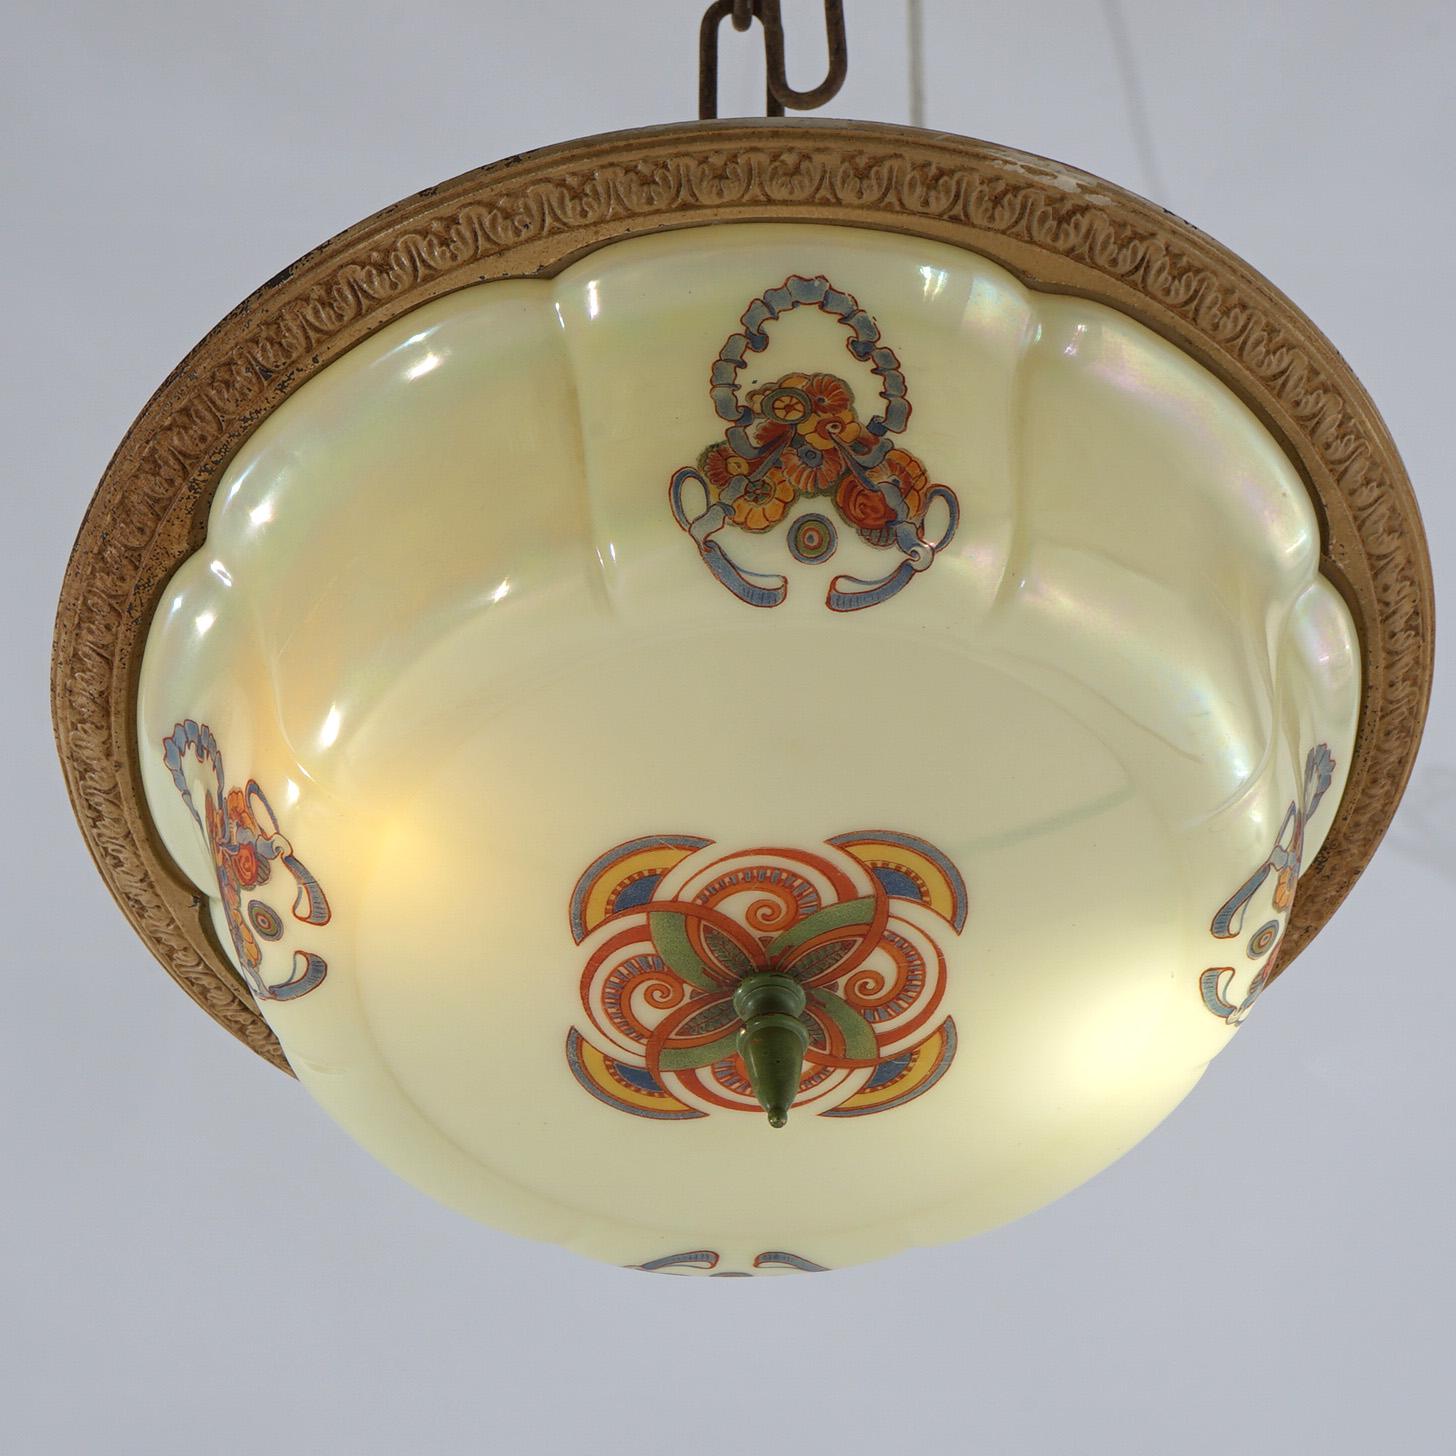 An antique Art Deco low profile flush mount light fixture by Lightolier offers hand painted opalescent glass shade with cast frame and two sockets, c1920

Measures- 7''H x 13.75''W x 13.75''D